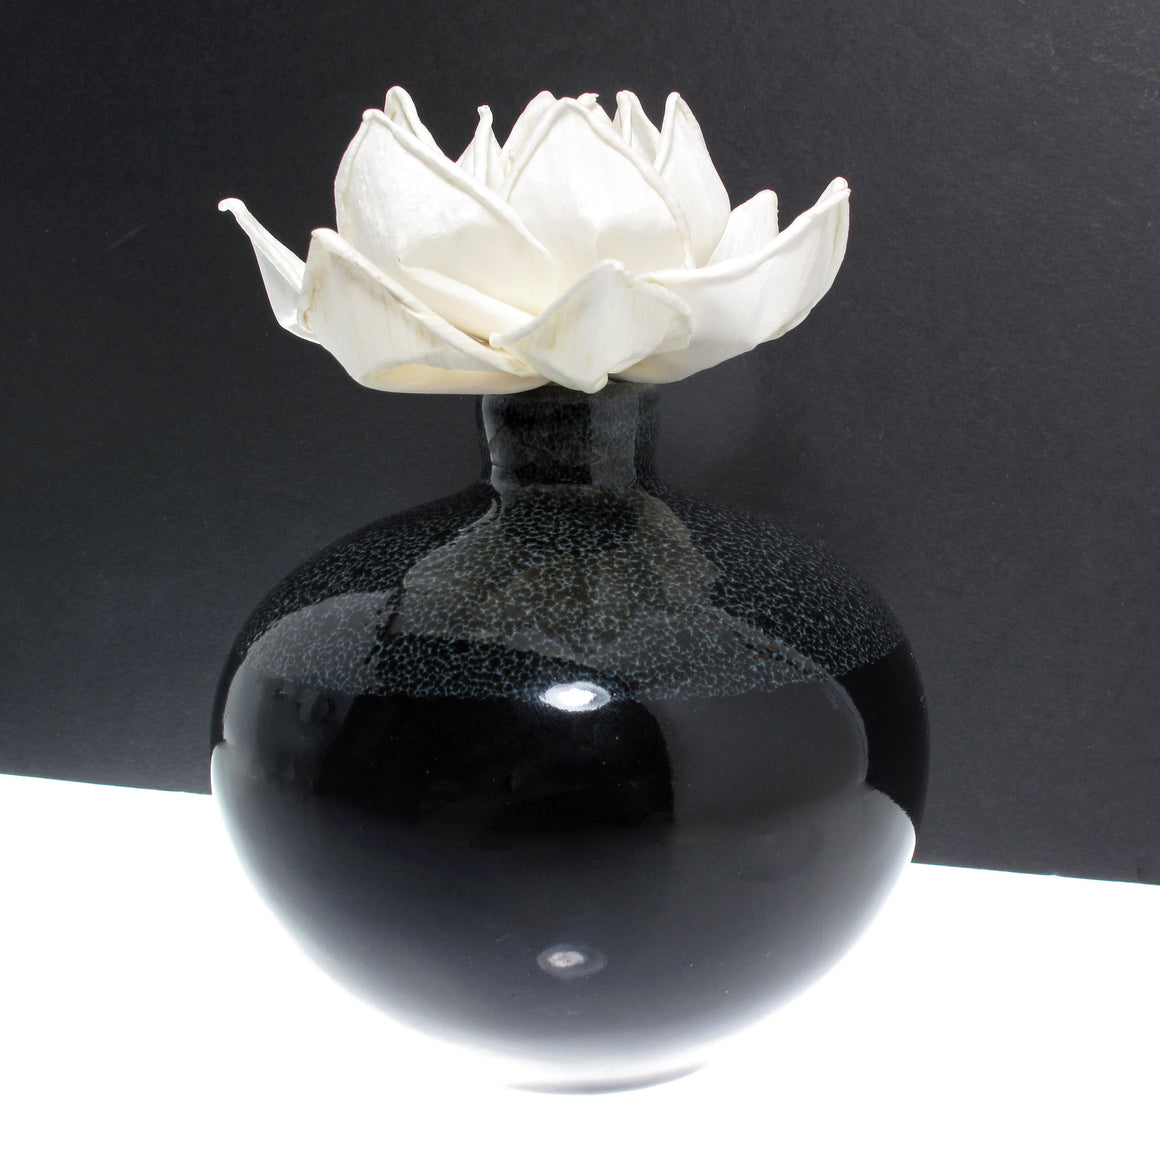 Sola Wood Flower Aroma Oil Diffuser with a Bendable Cotton Wire Wick, Lotus - TropicaZona